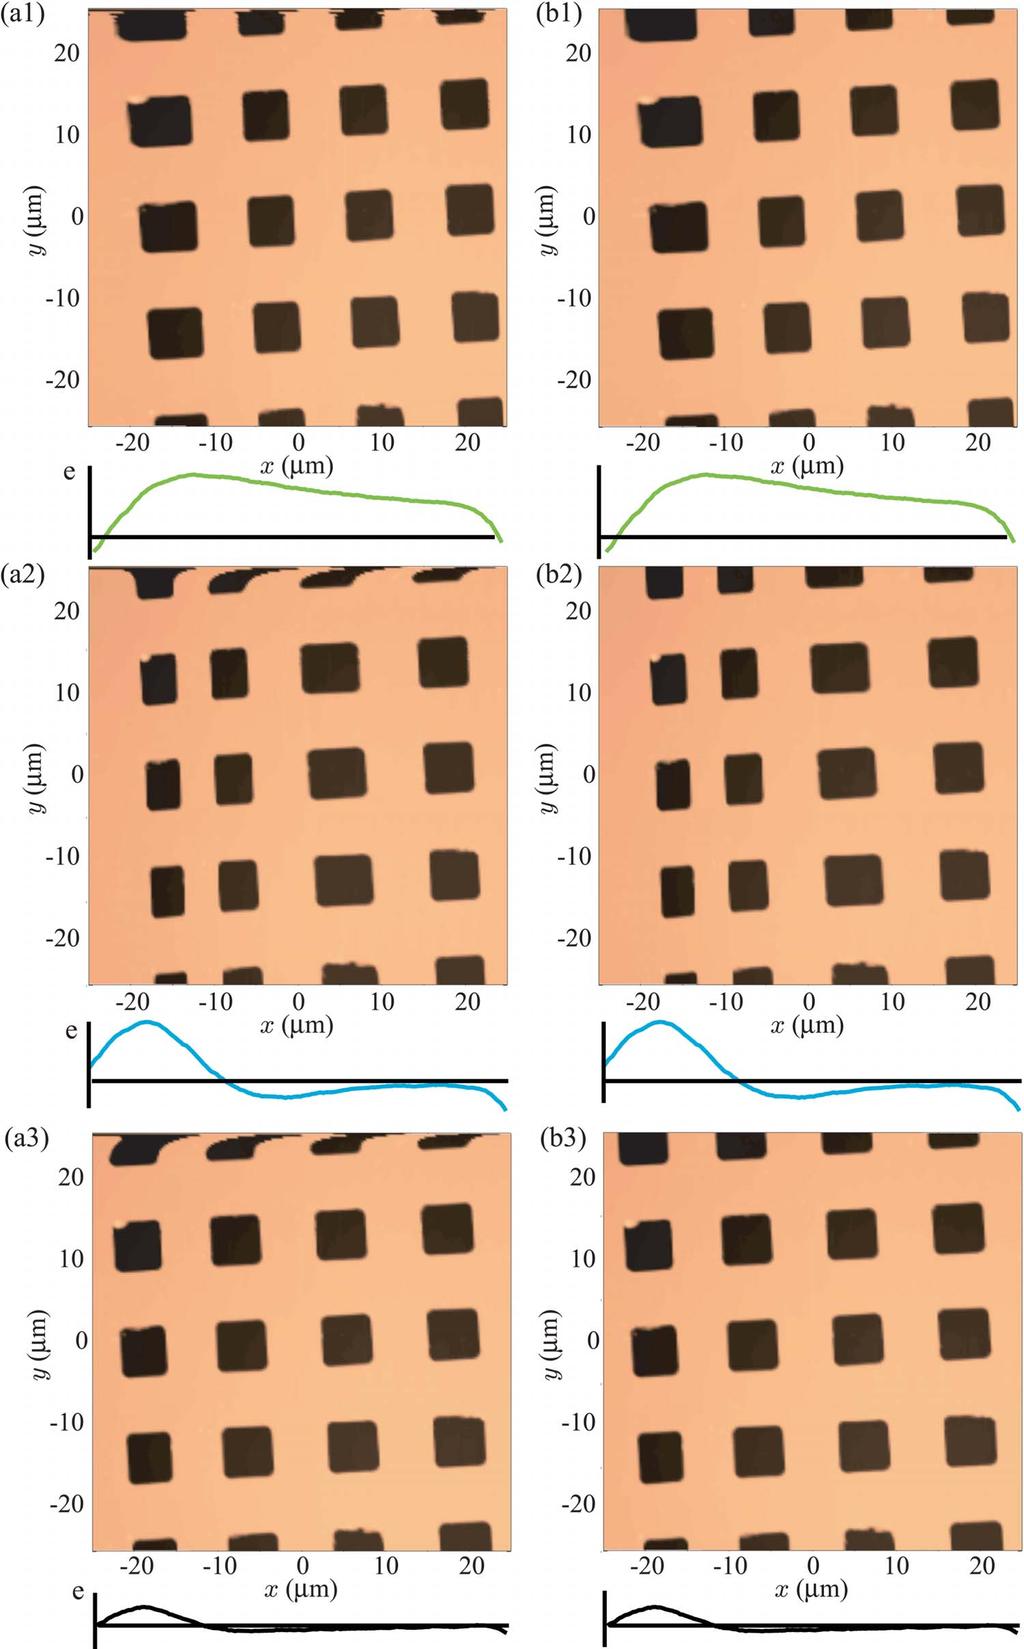 Fig. 14 Atomic force microscope images using measured tracking response along the x-axis at 25 Hz and ±25 m range. Steady-state tracking error shown below each image.